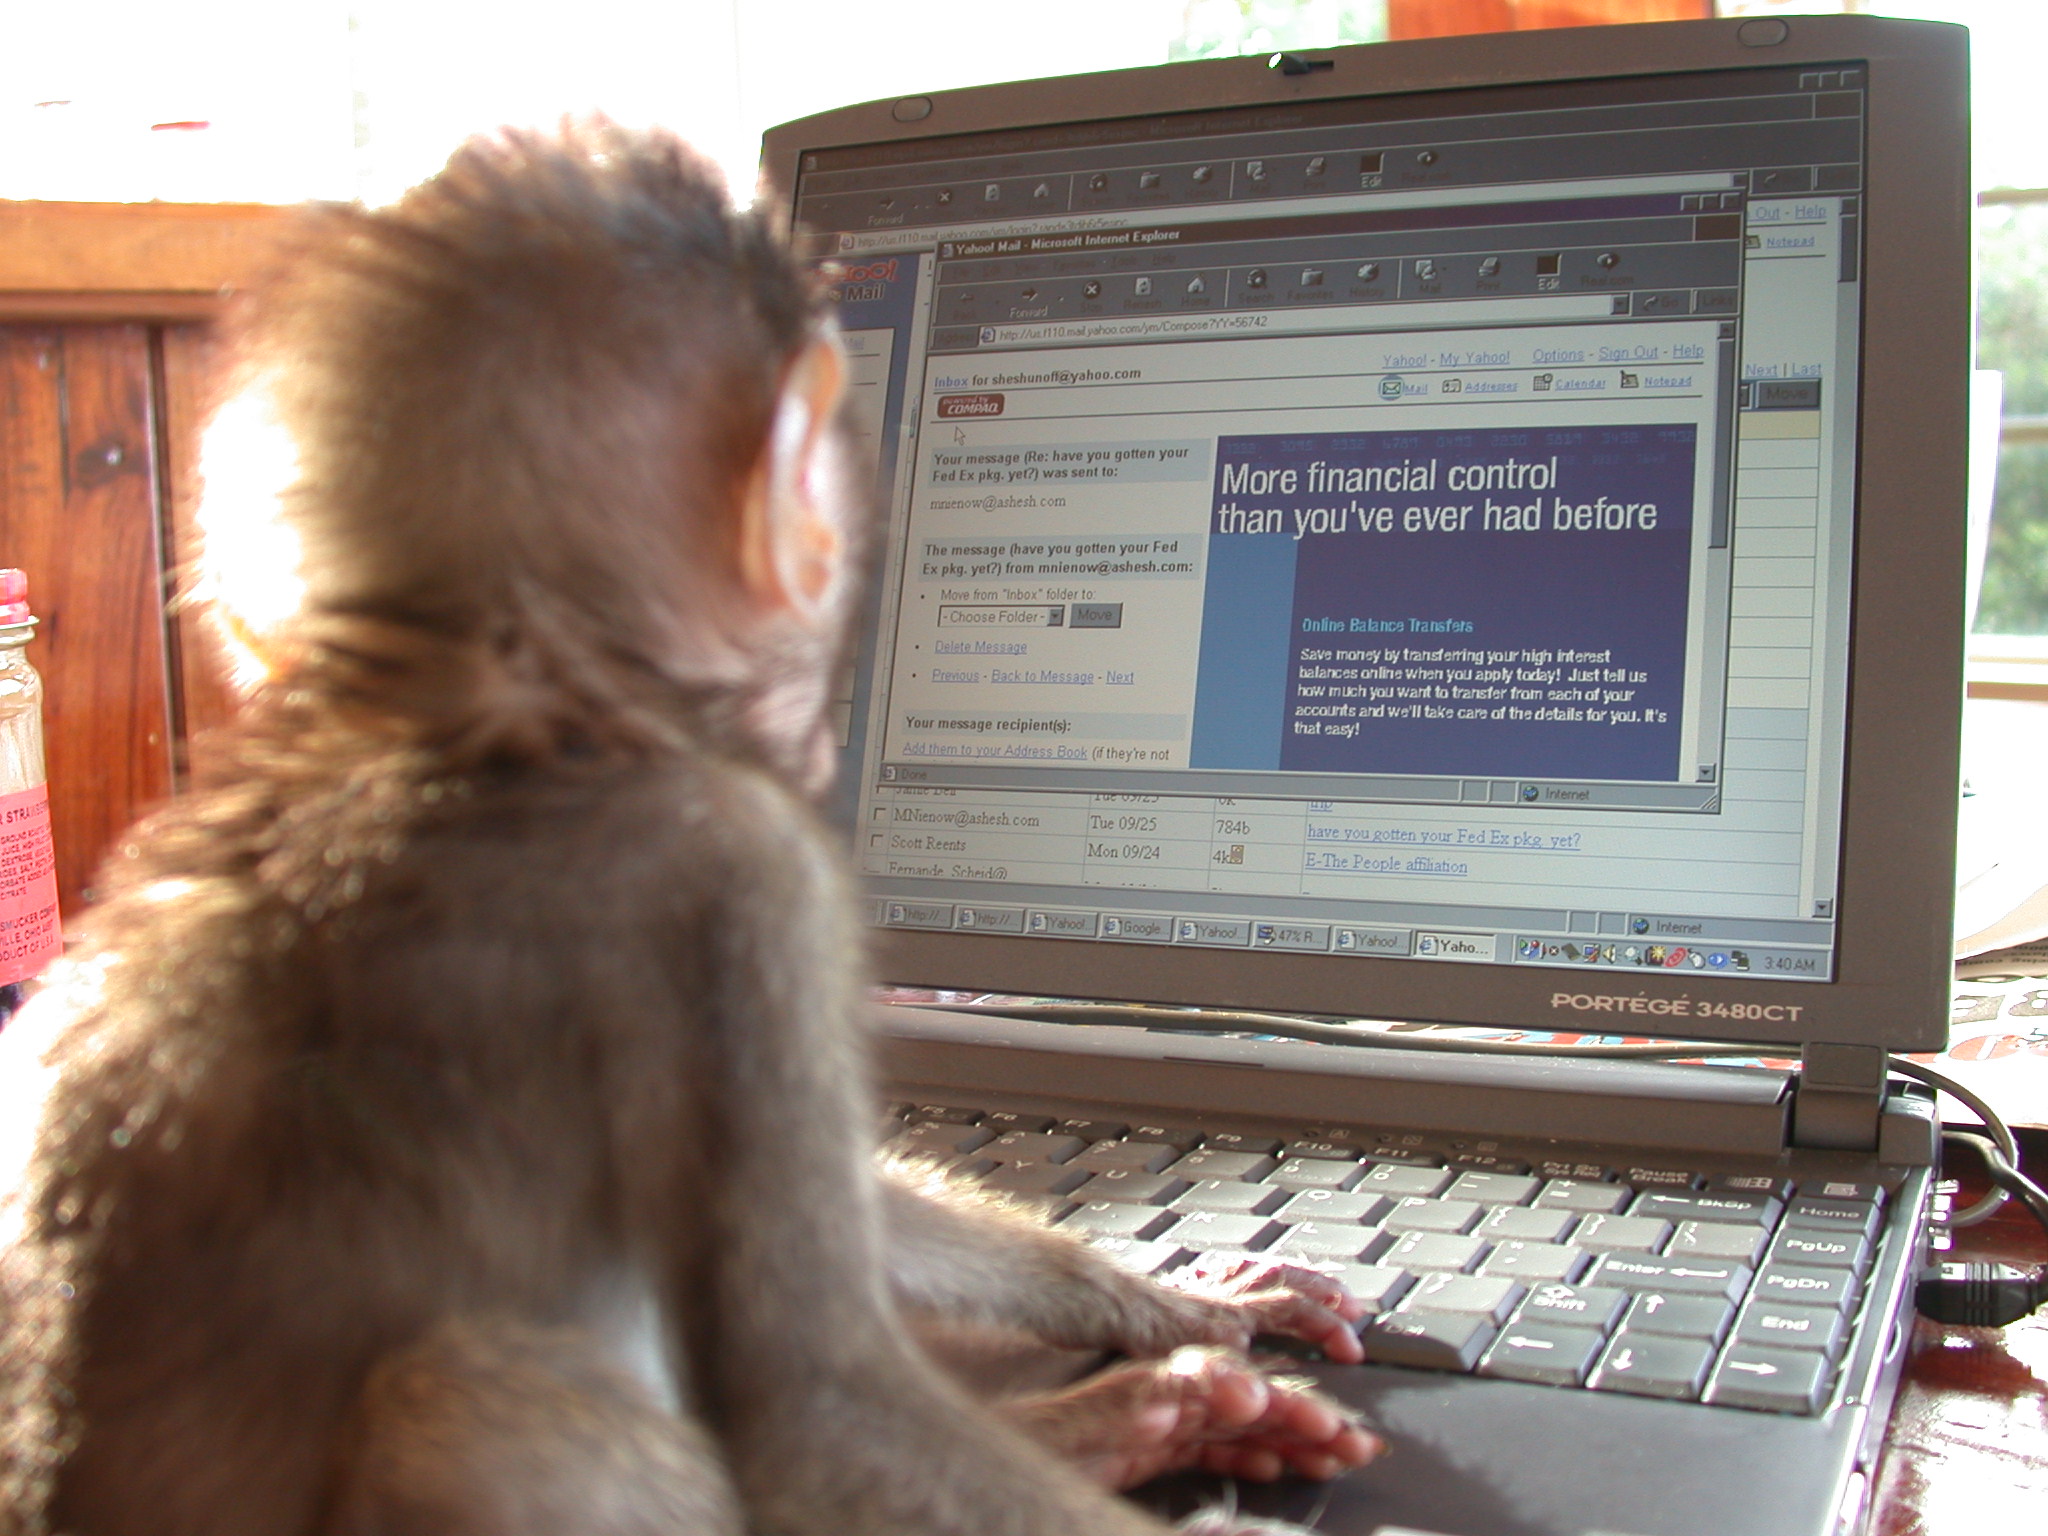 Monkey in front of a computer - Sheshunoff - abeginnersguidetoparadise.com.JPG